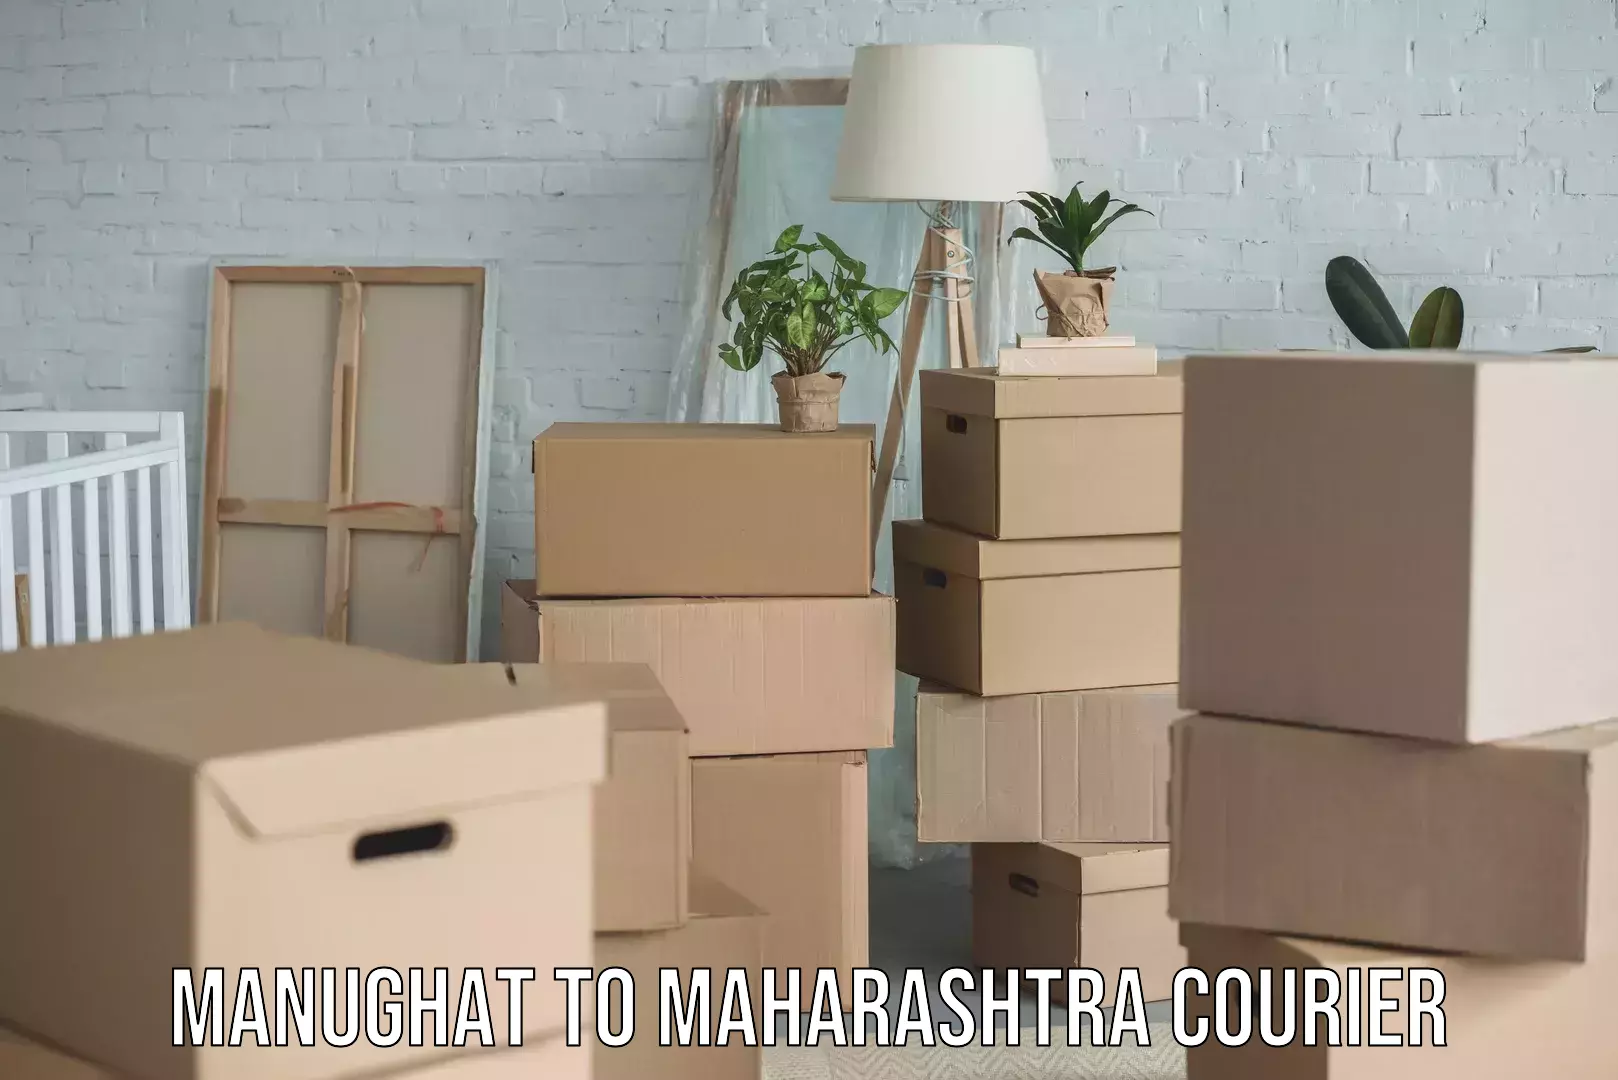 Same-day delivery solutions Manughat to Maharashtra